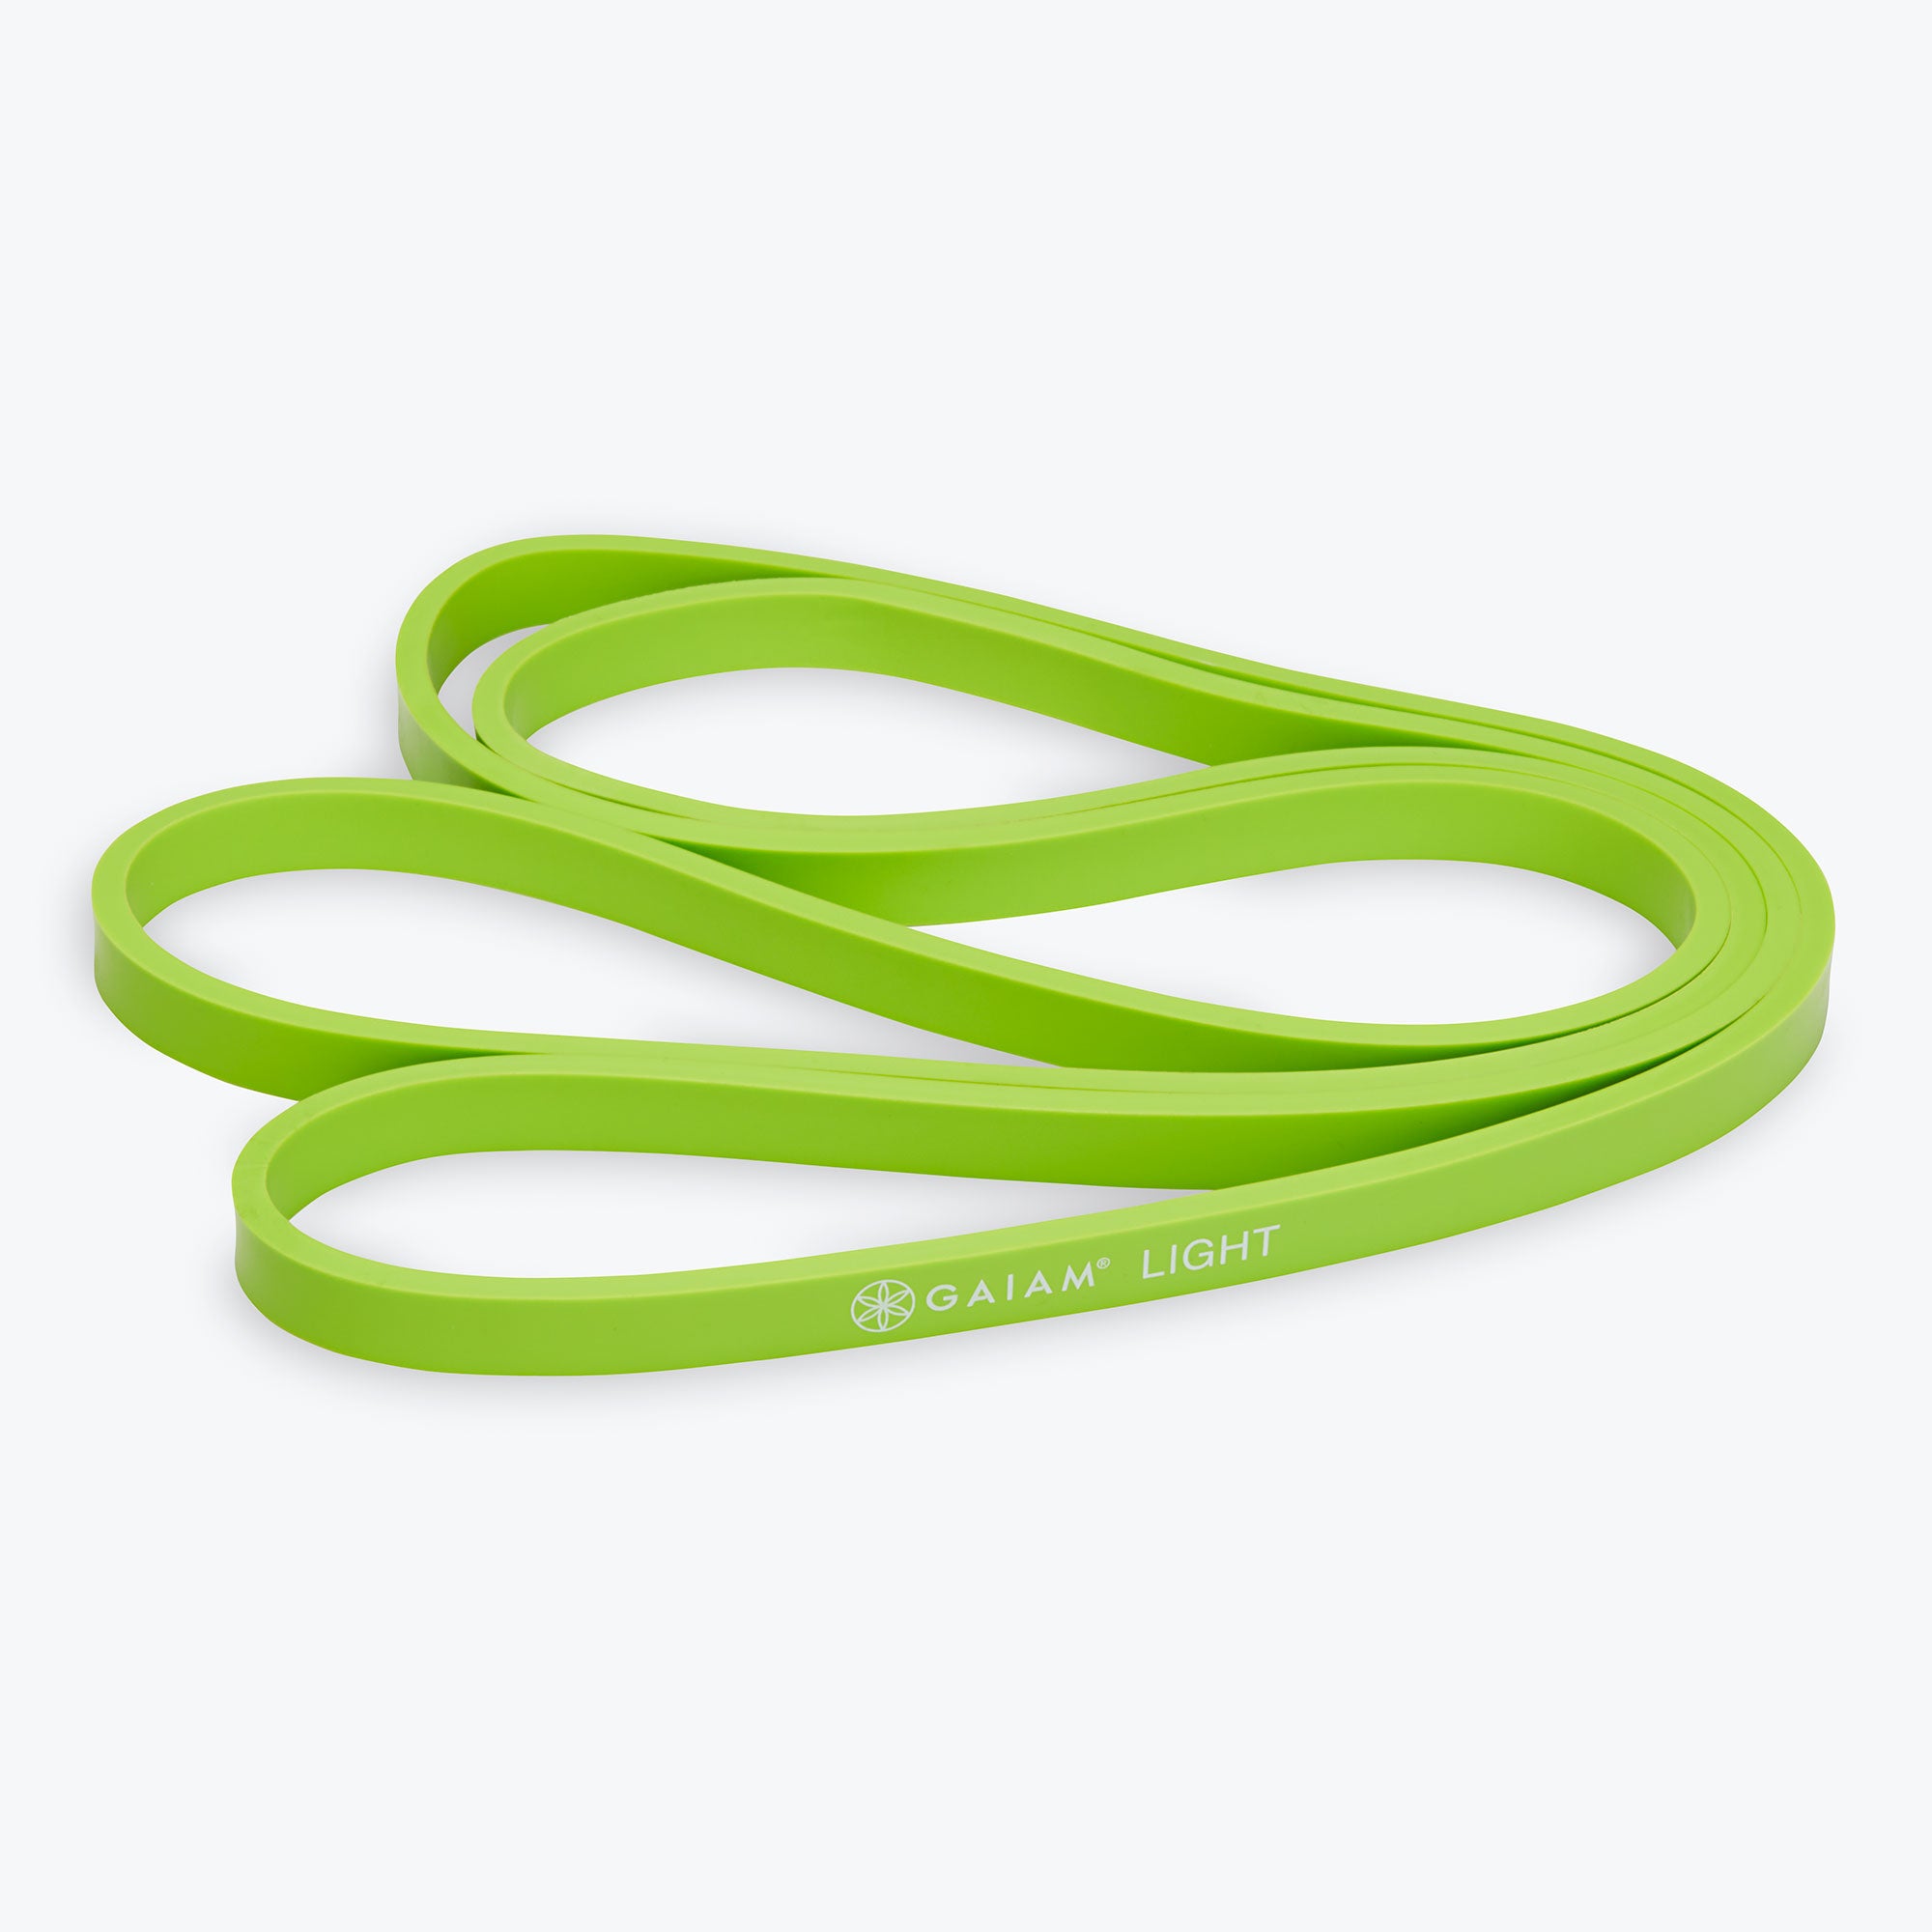 Evolve By Gaiam 3 Pack Mini Loop Bands 3 Levels of Resistance